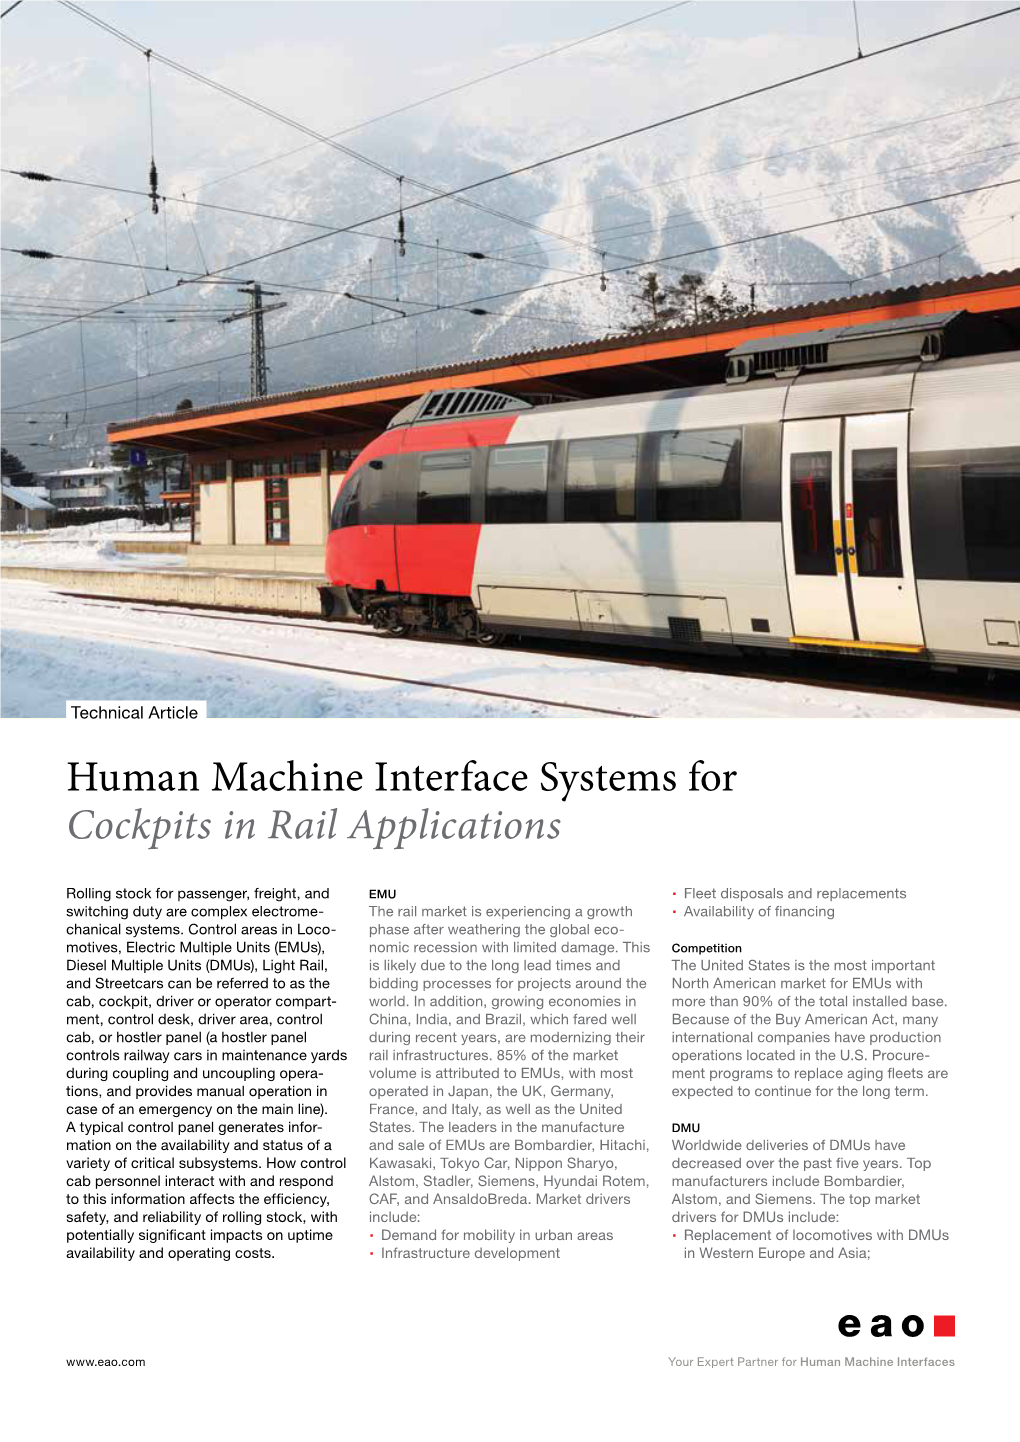 Human Machine Interface Systems for Cockpits in Rail Applications